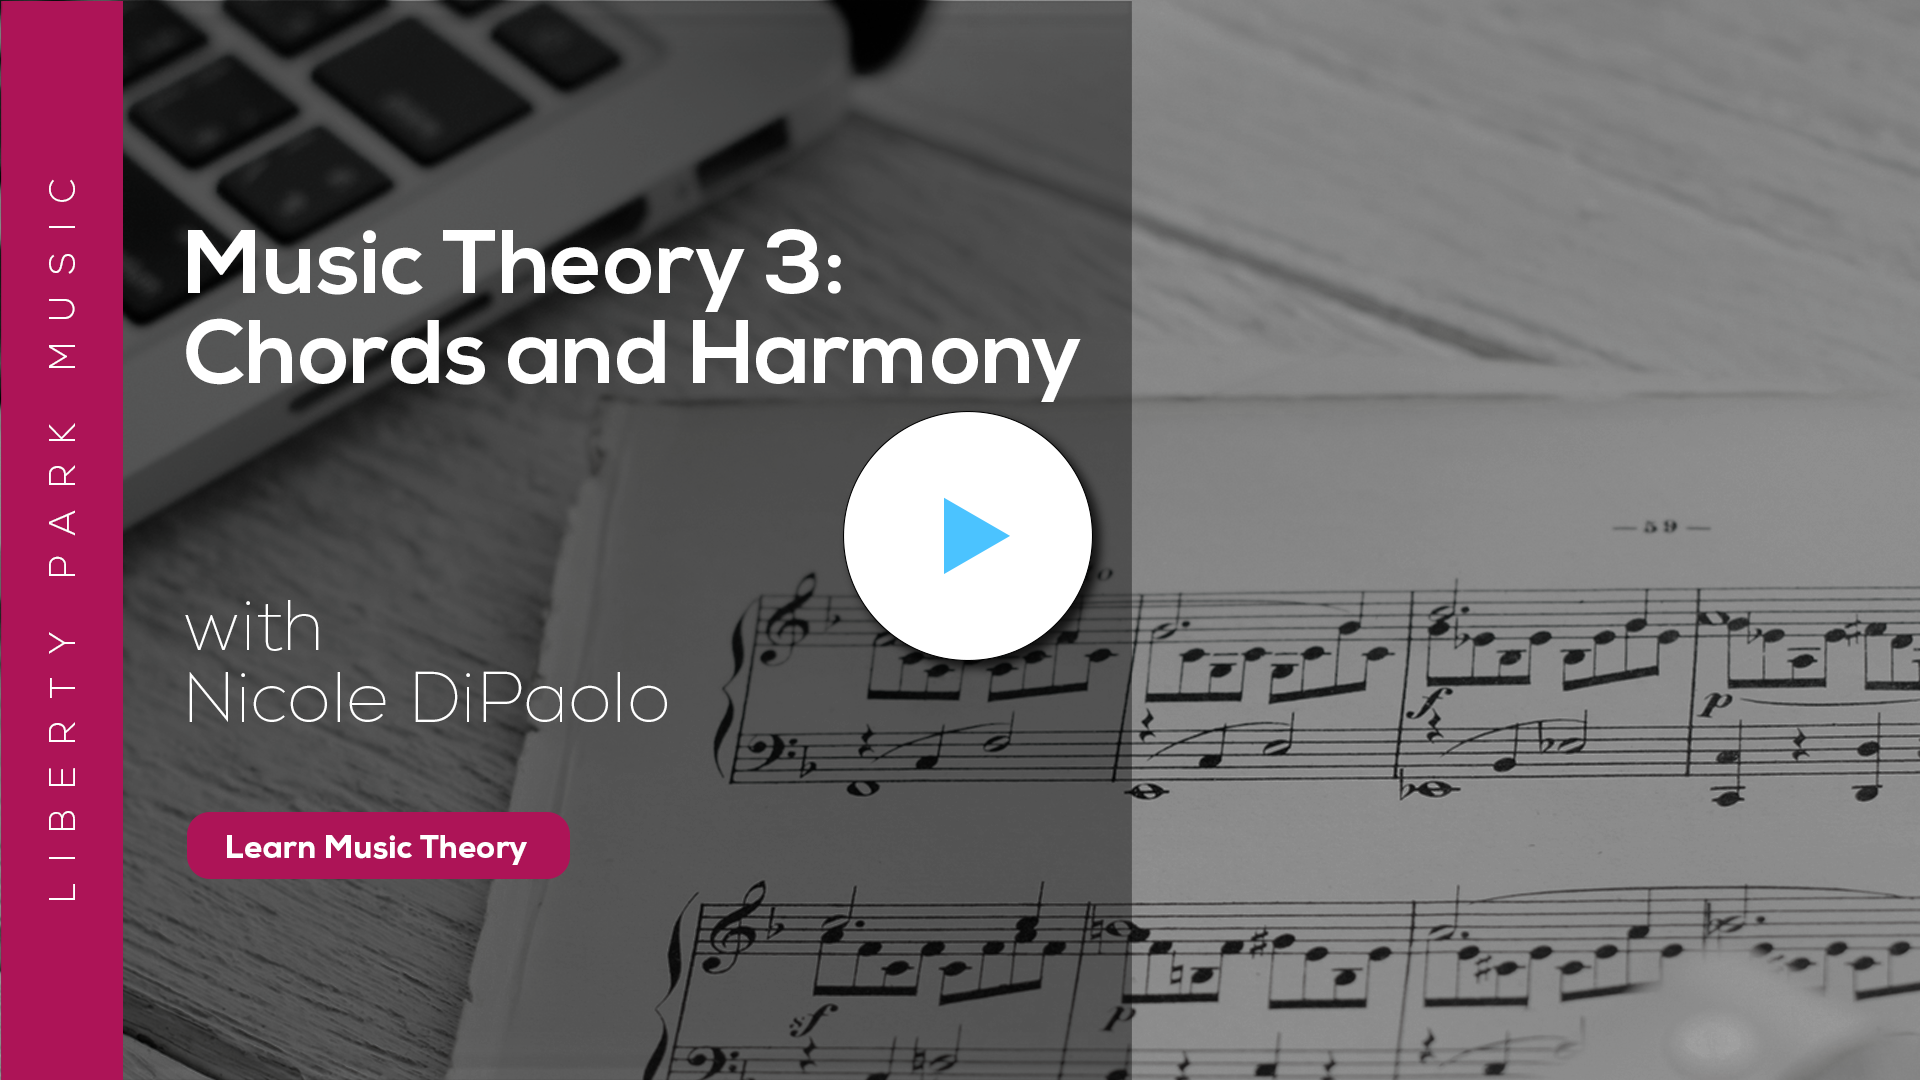 Music Theory 3 (with play button)